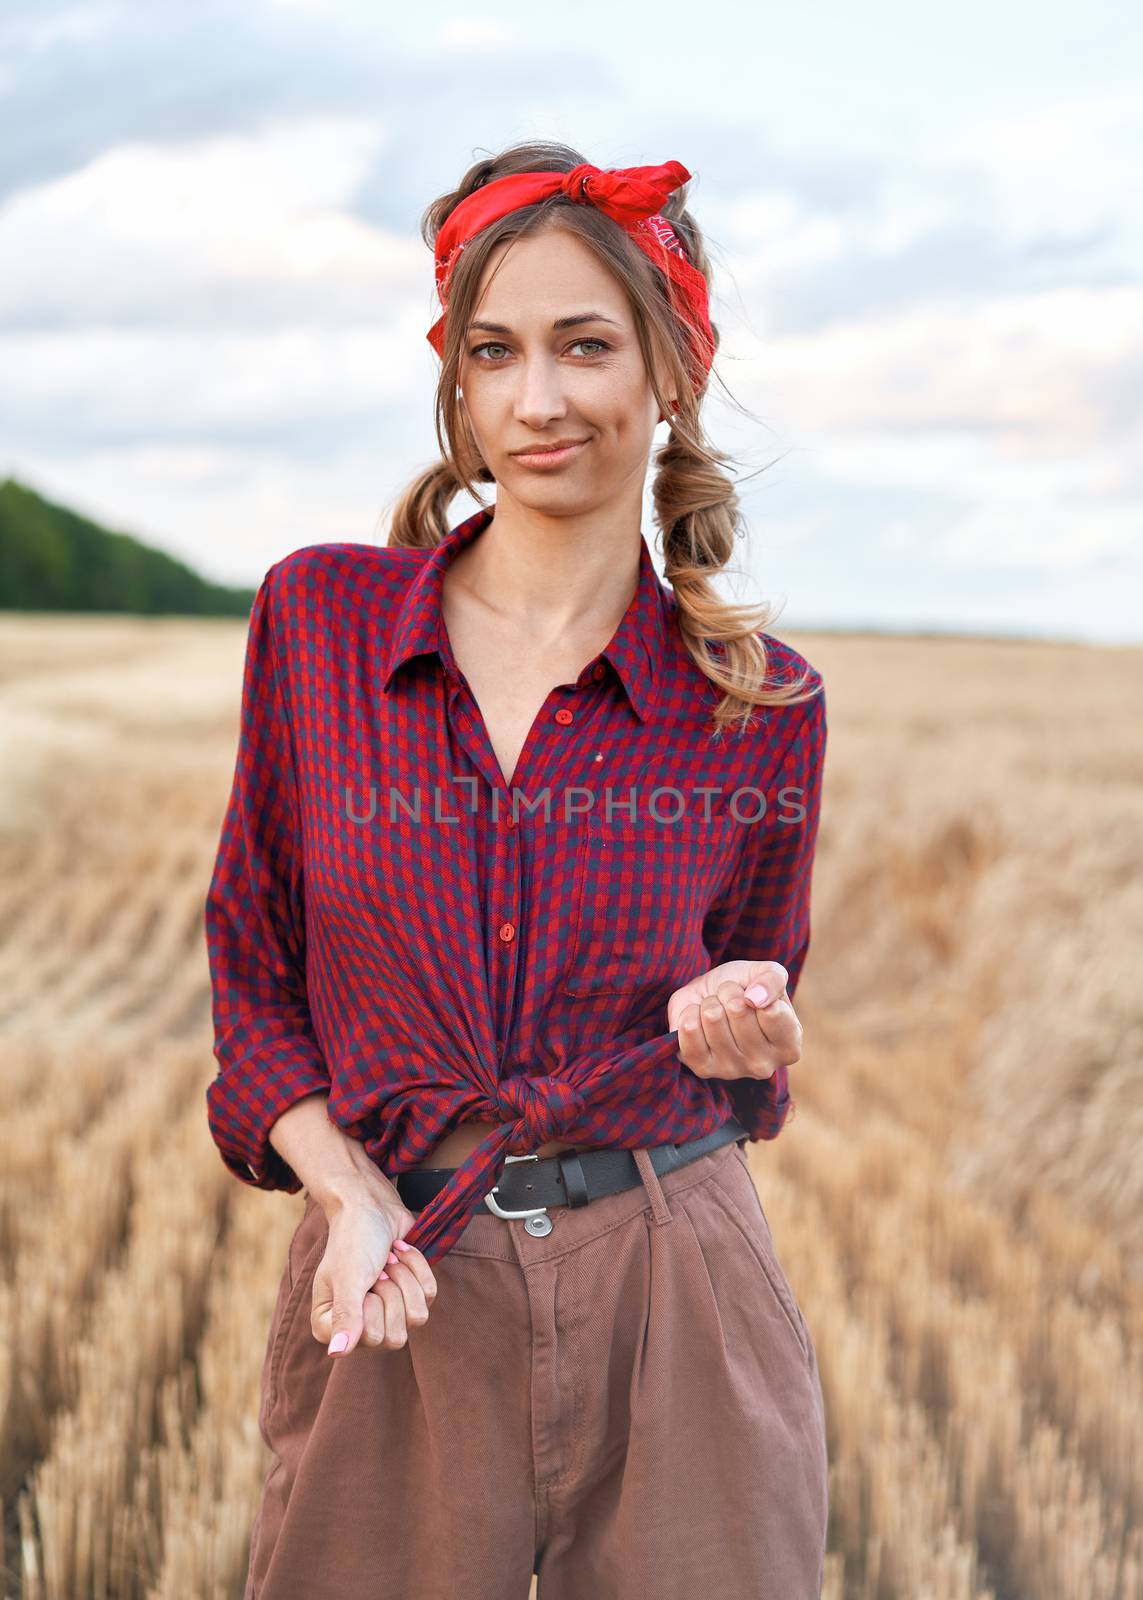 Woman farmer standing farmland smiling Female agronomist specialist farming agribusiness Happy positive caucasian worker agricultural field dressed red checkered shirt and bandana